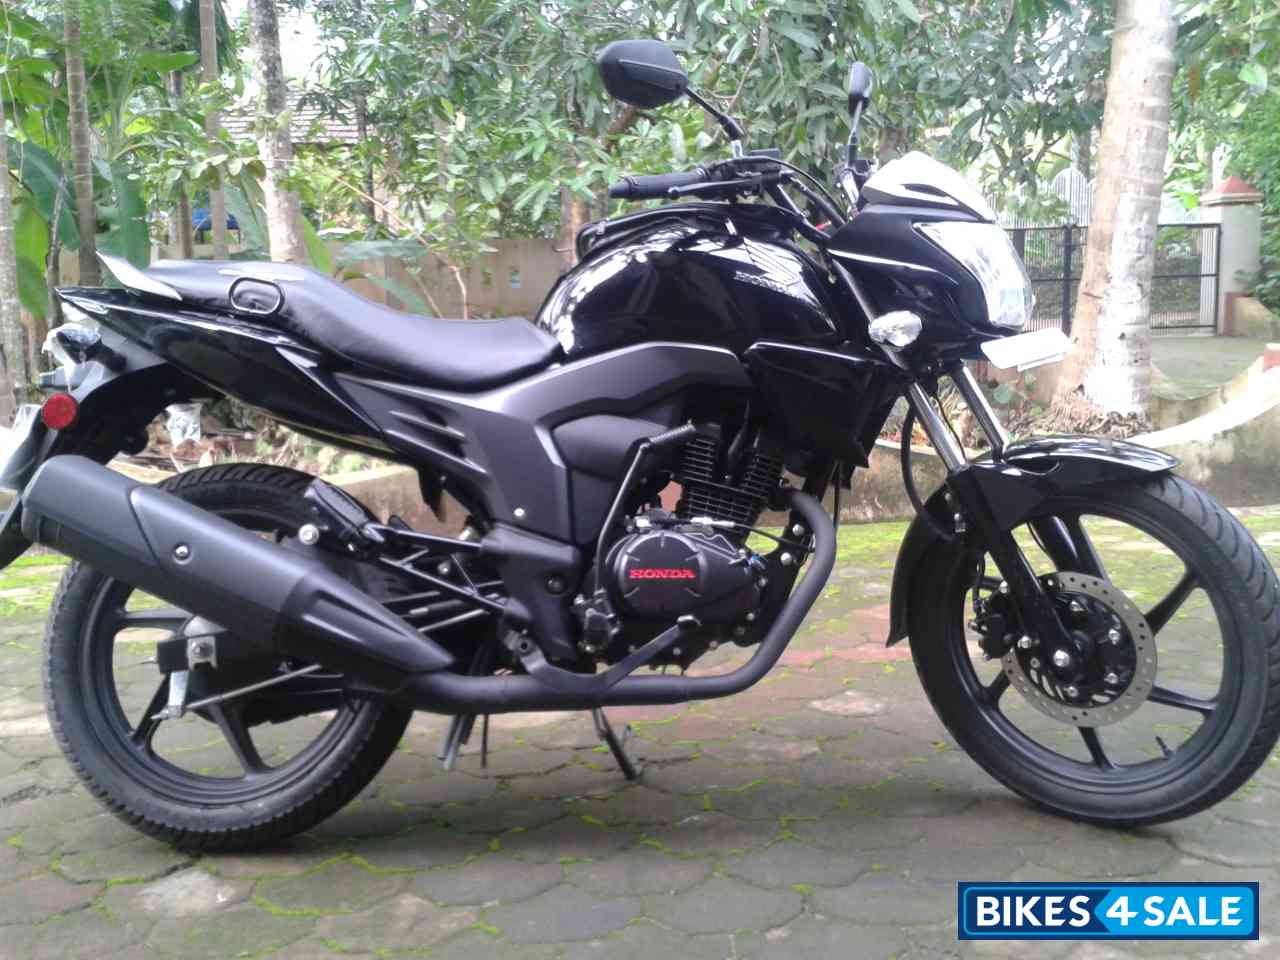 Used 2013 model Honda CB Trigger for sale in Palakkad. ID 103577 